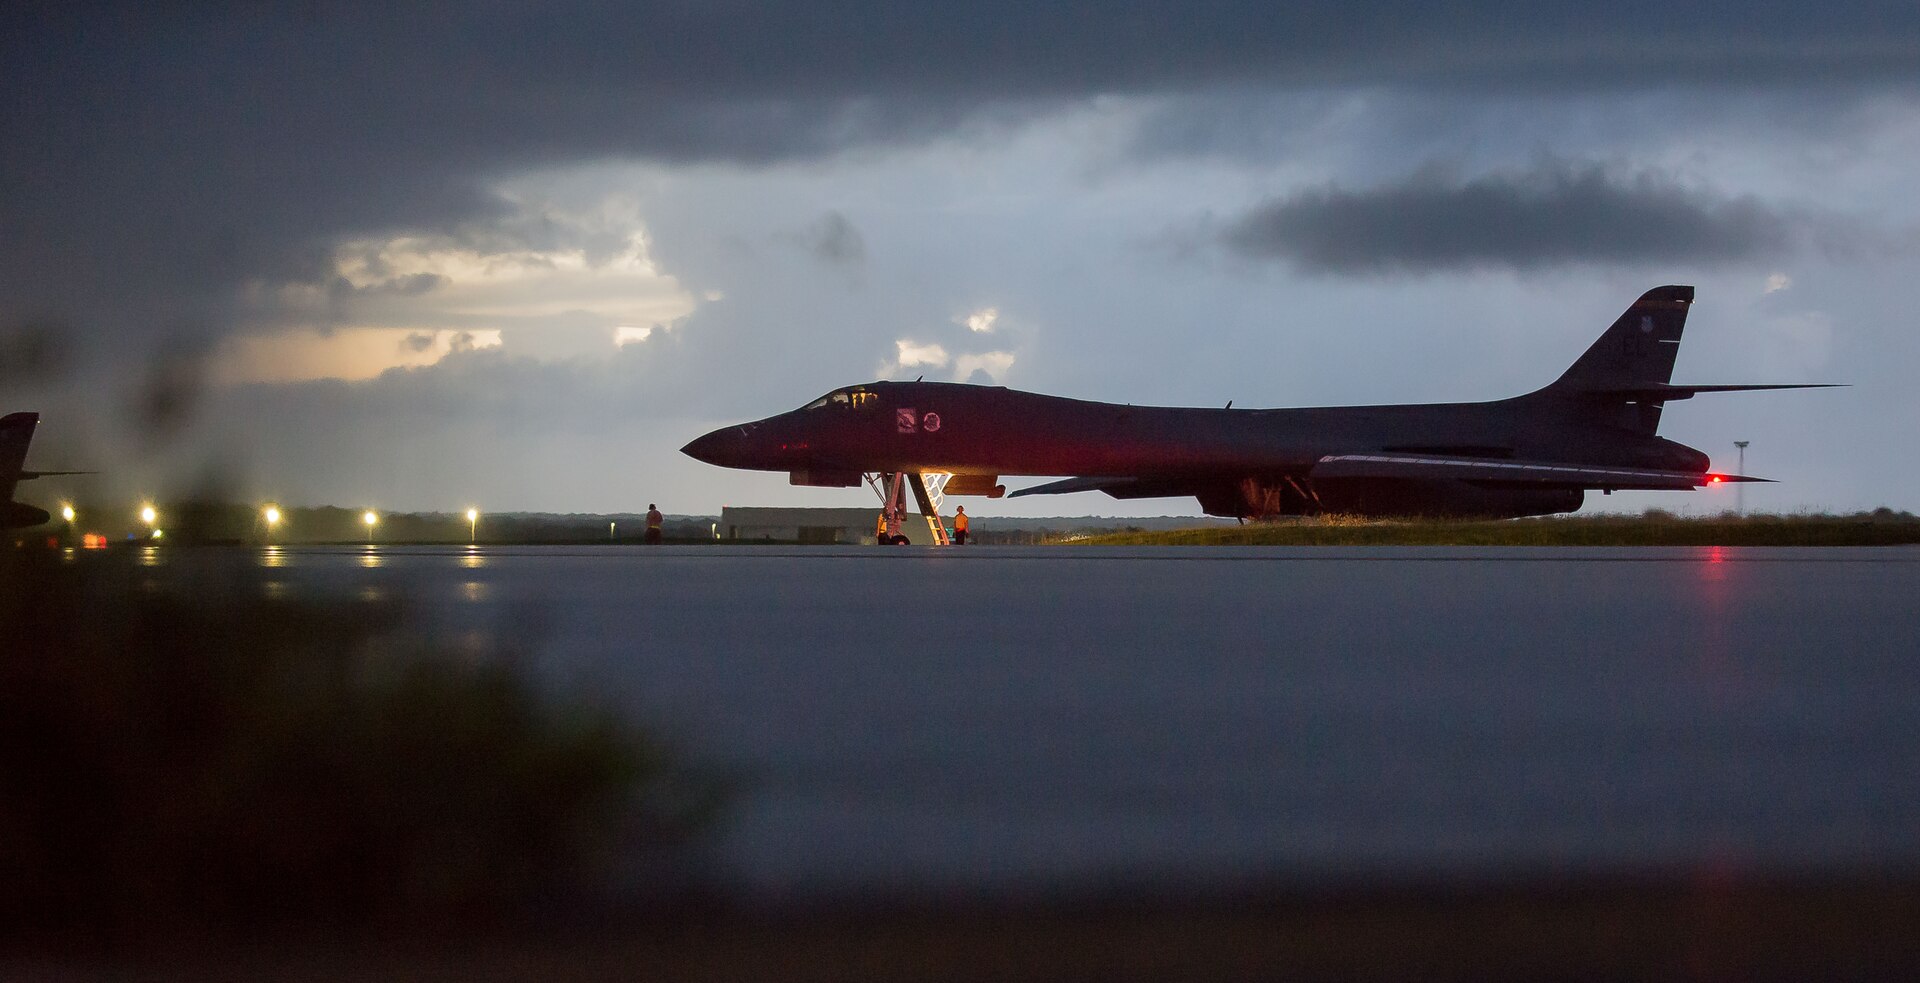 A U.S. Air Force B-1B Lancer, assigned to the 37th Expeditionary Bomb Squadron, deployed from Ellsworth Air Force Base, South Dakota, prepares to take off from Andersen AFB, Guam, Sept. 23, 2017. This mission was flown as part of the continuing demonstration of the ironclad U.S. commitment to the defense of its homeland and in support of its partners and allies. (U.S. Air Force photo/Staff Sgt. Joshua Smoot